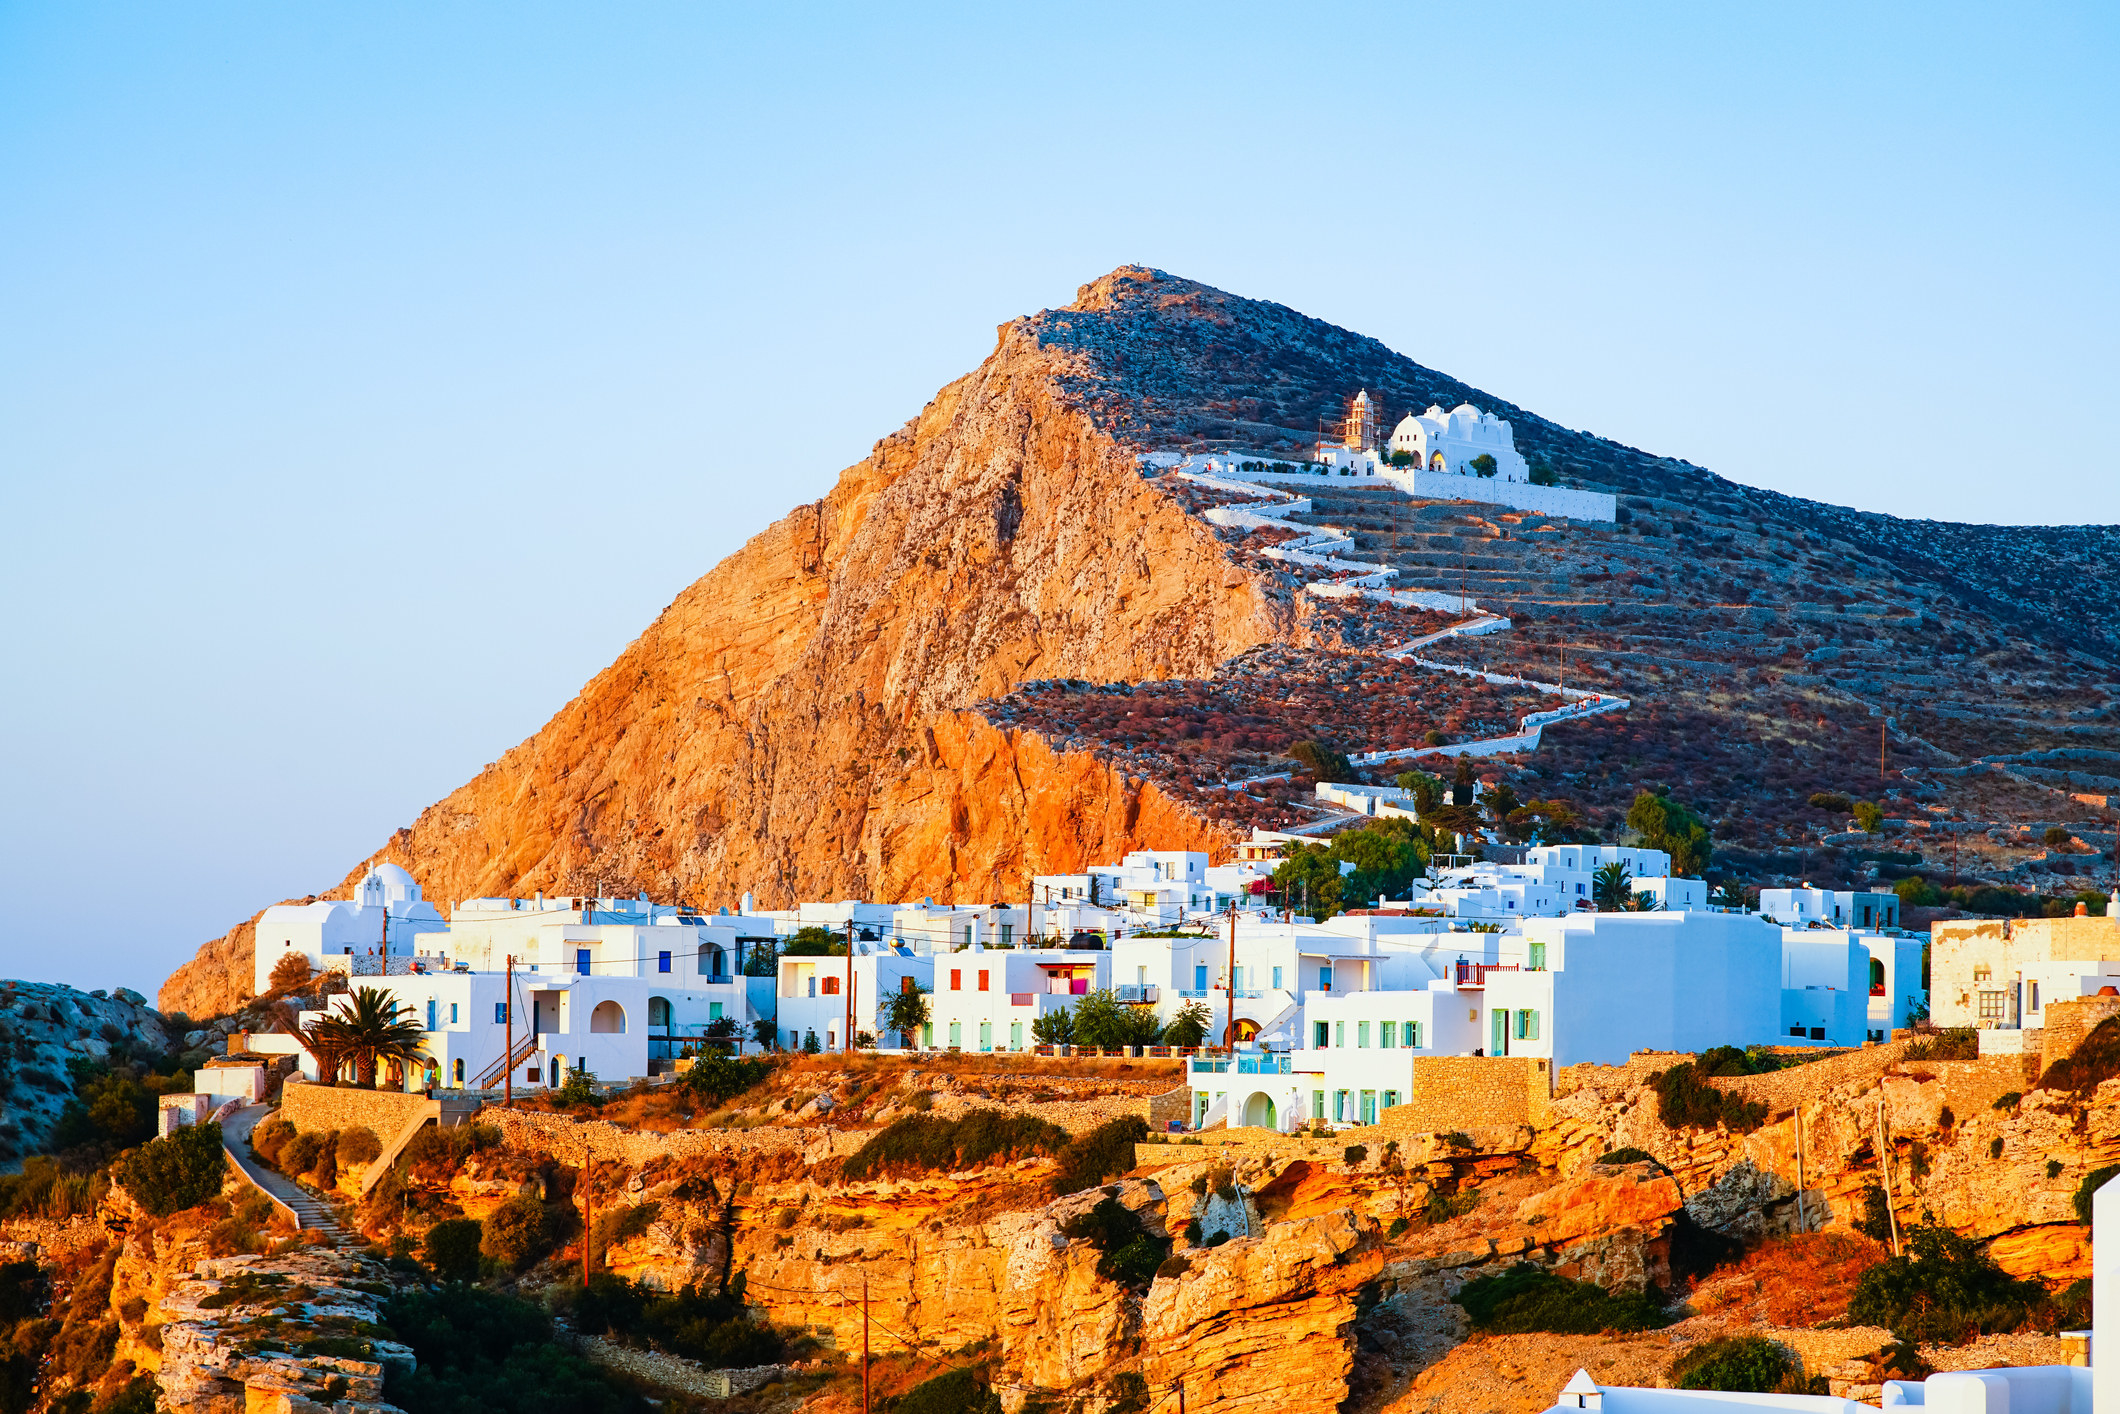 The main town on the Greek island of Folegandros